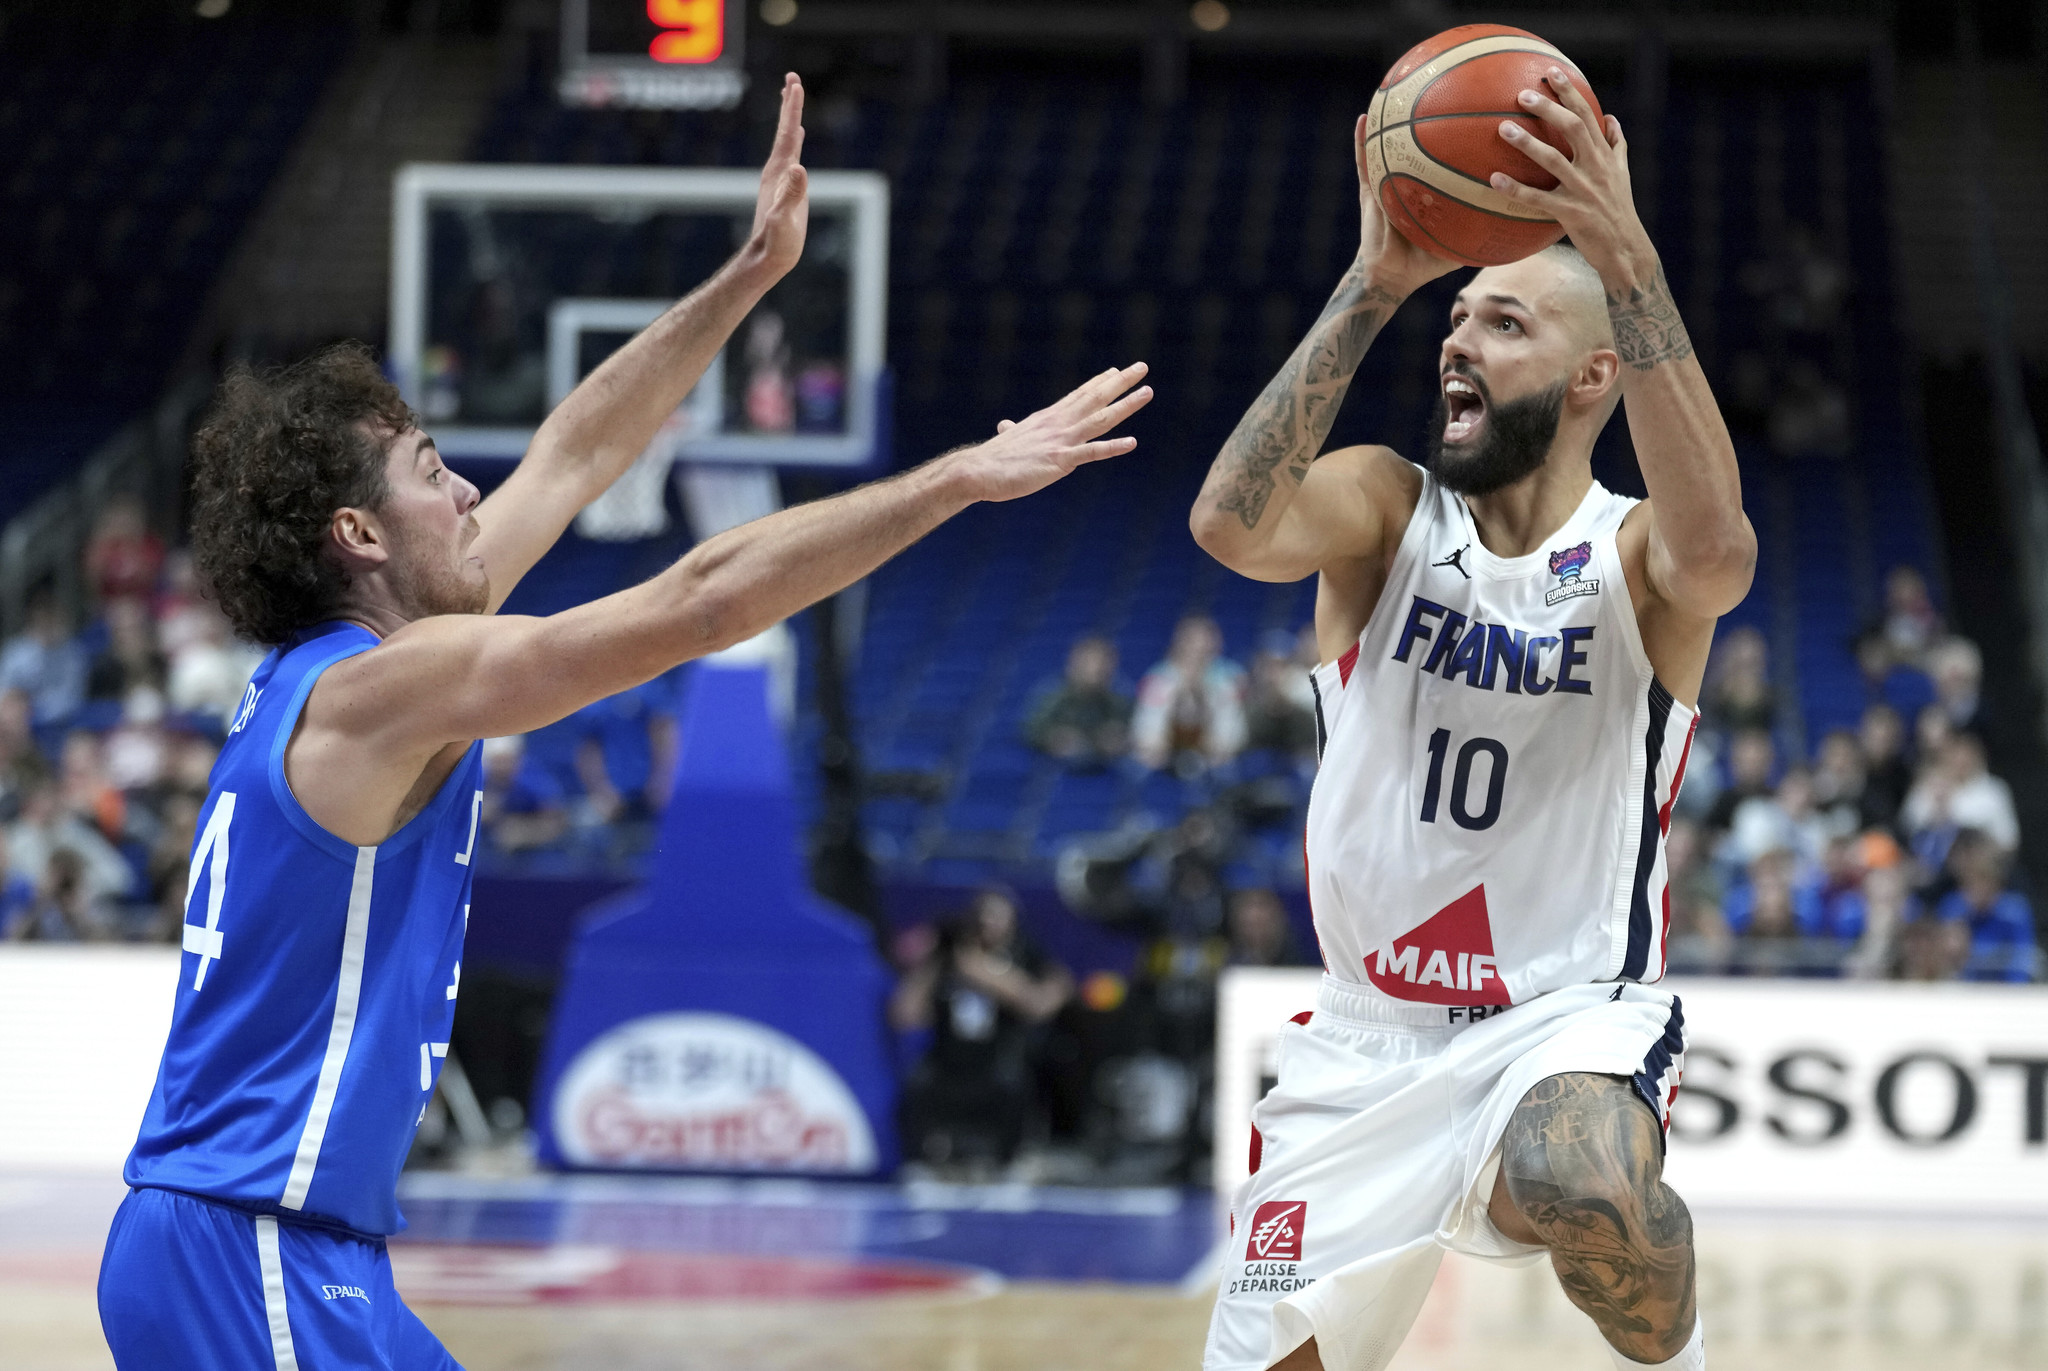 Eva Fournier of France, right, is challenged by Italy's Alessandro Pajola, left, during the Eurobasket quarter final basketball match between France and Italy in  lt;HIT gt;Berlin lt;/HIT gt;, Germany, Wednesday, Sept. 14, 2022. (AP Photo/Michael Sohn)